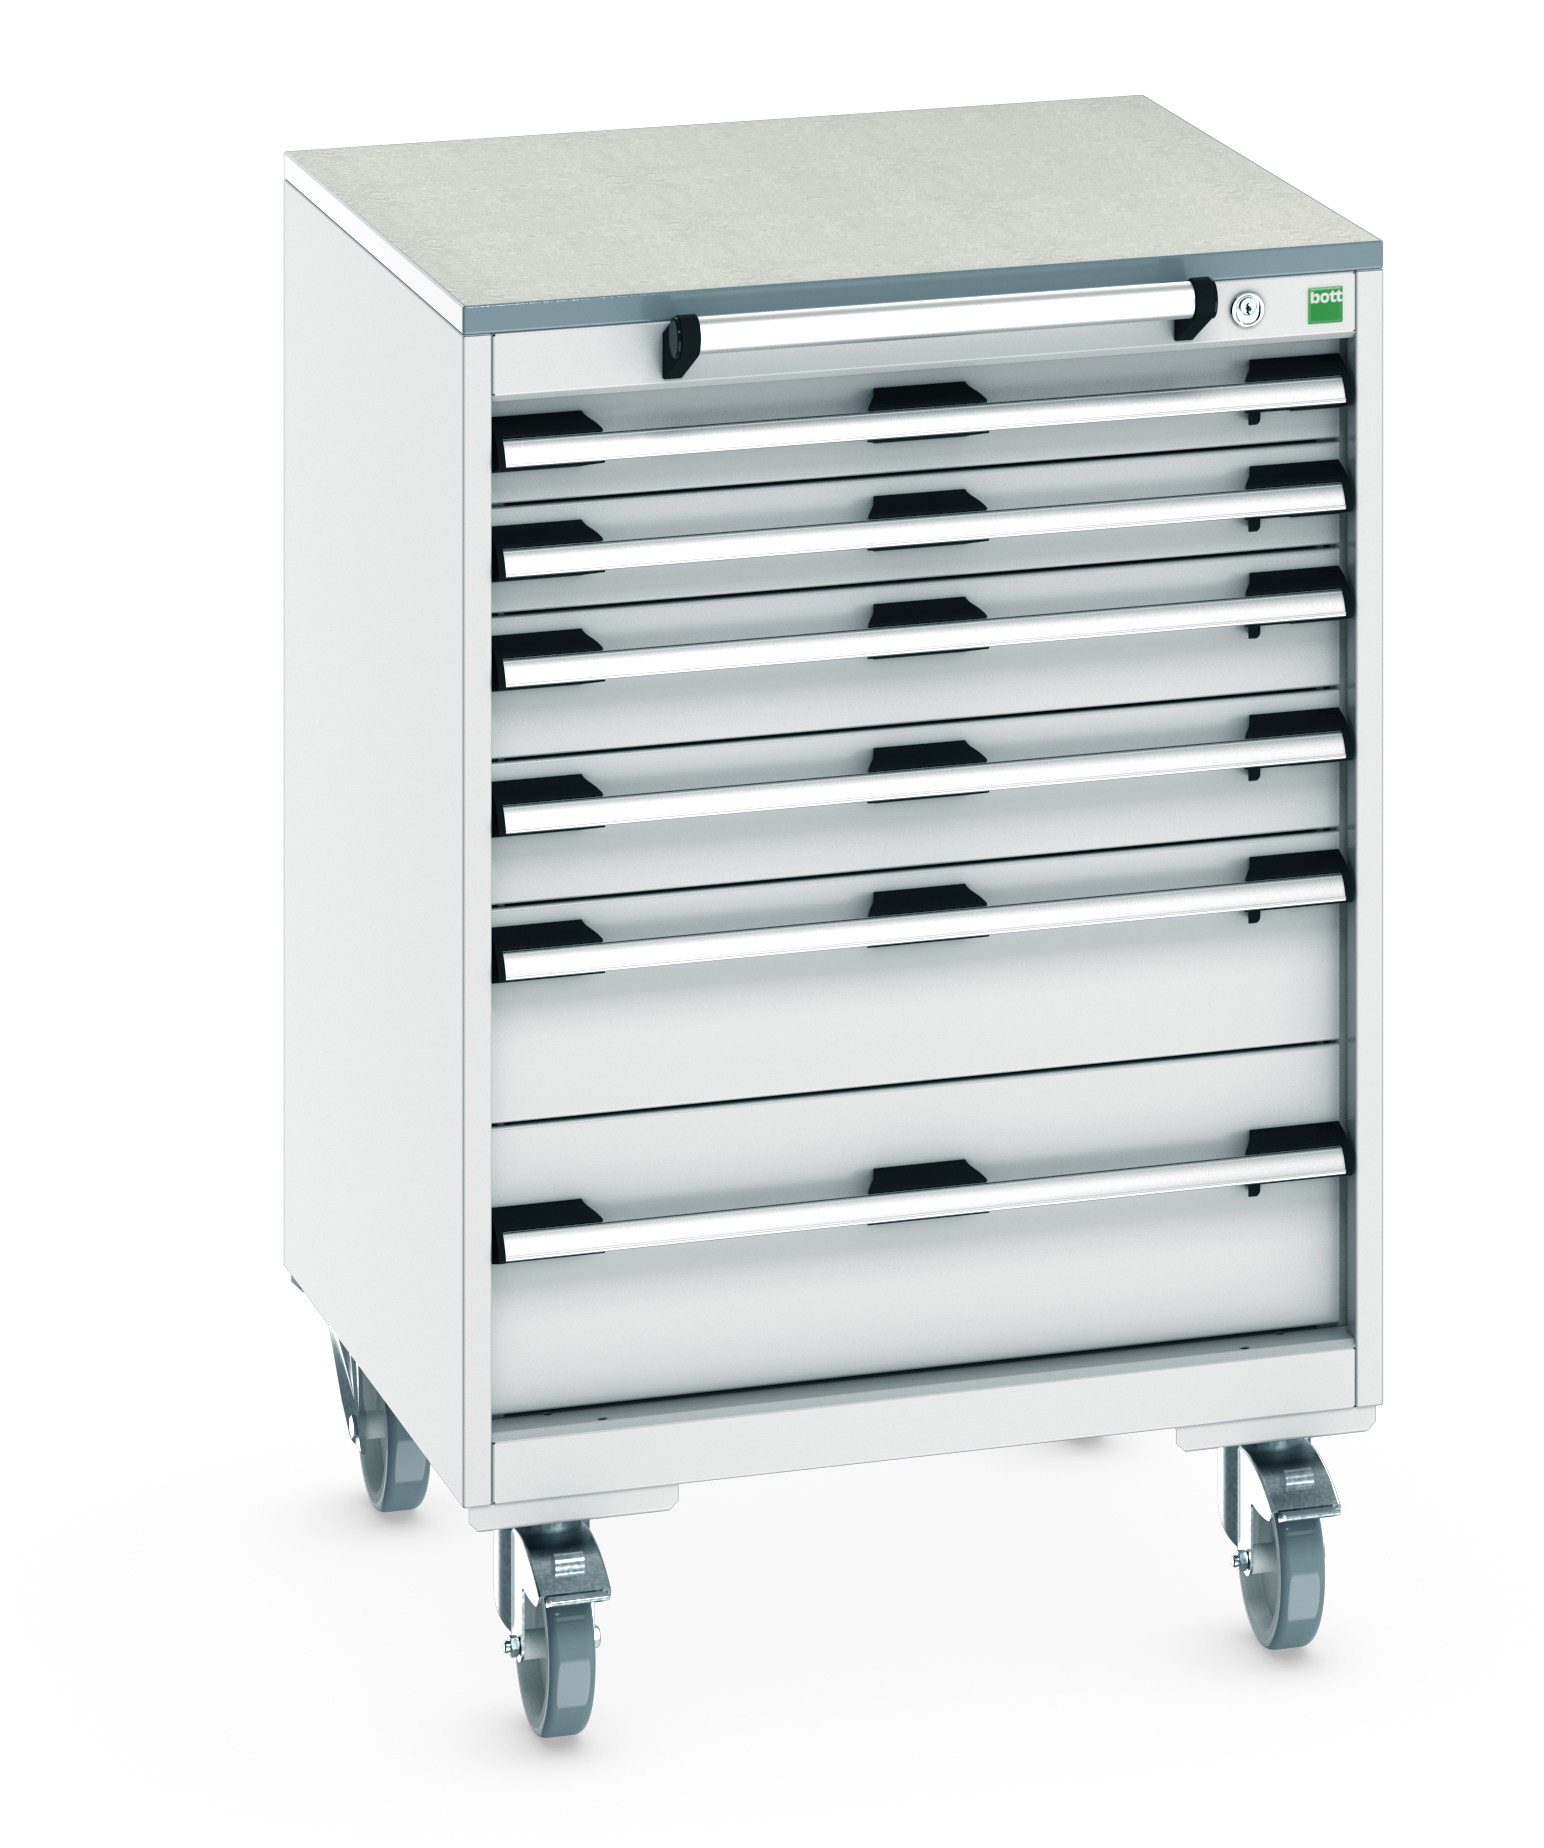 Bott Cubio Mobile Drawer Cabinet With 6 Drawers & Lino Worktop - 40402152.16V